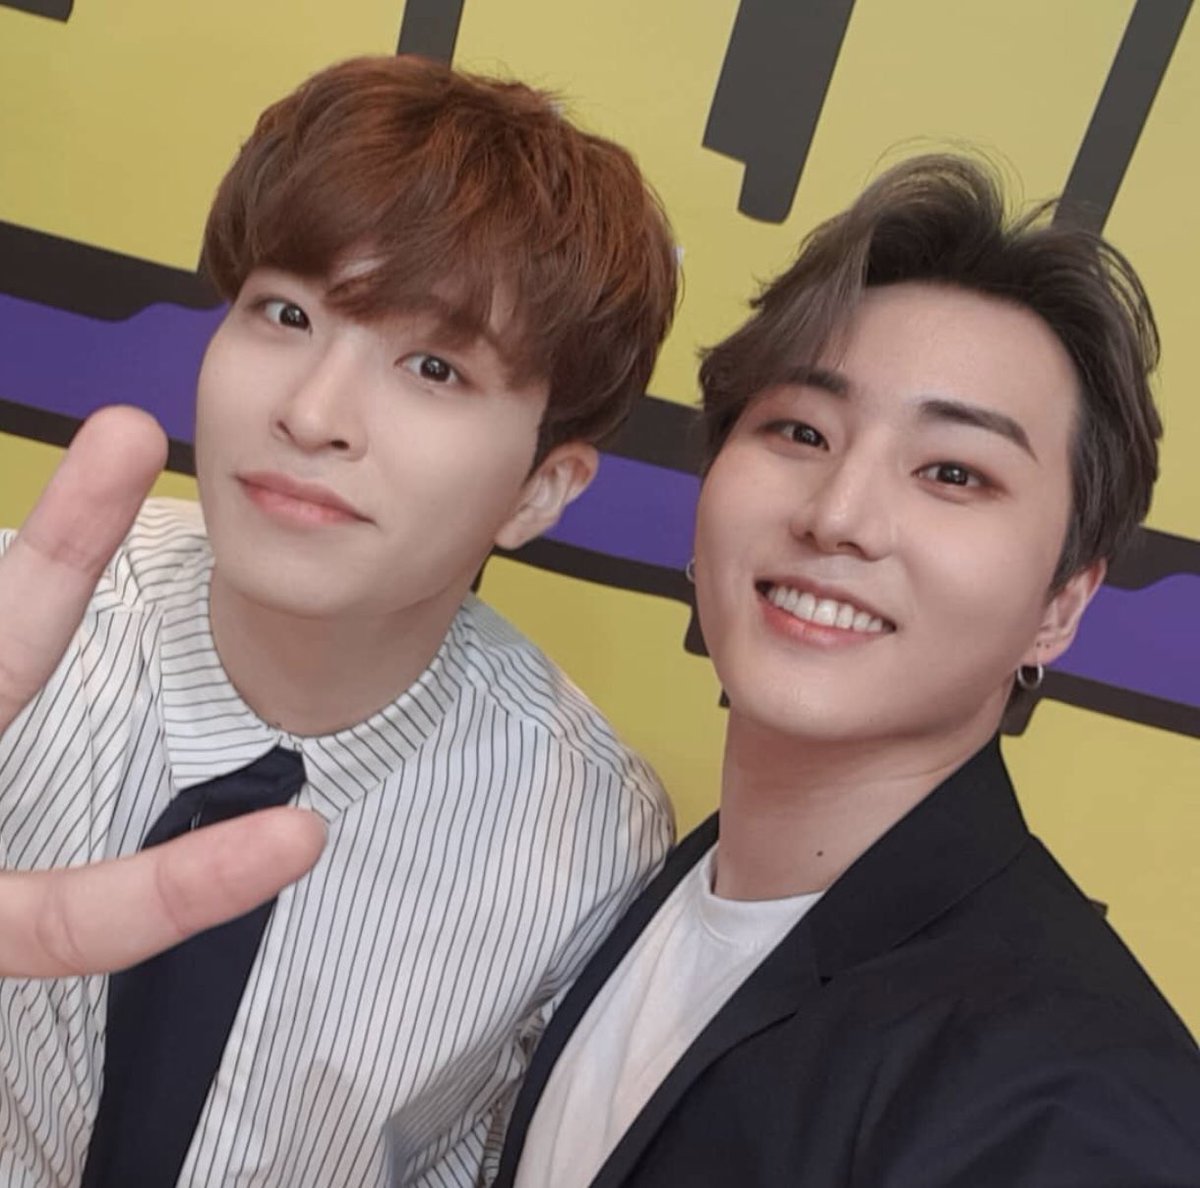 thank you youngk and young jae for being great DJ’s!! thank you for making every guest feel comfortable, and thank you both for working so hard!! i will continue to you give my support in the future! thank you for everything <3